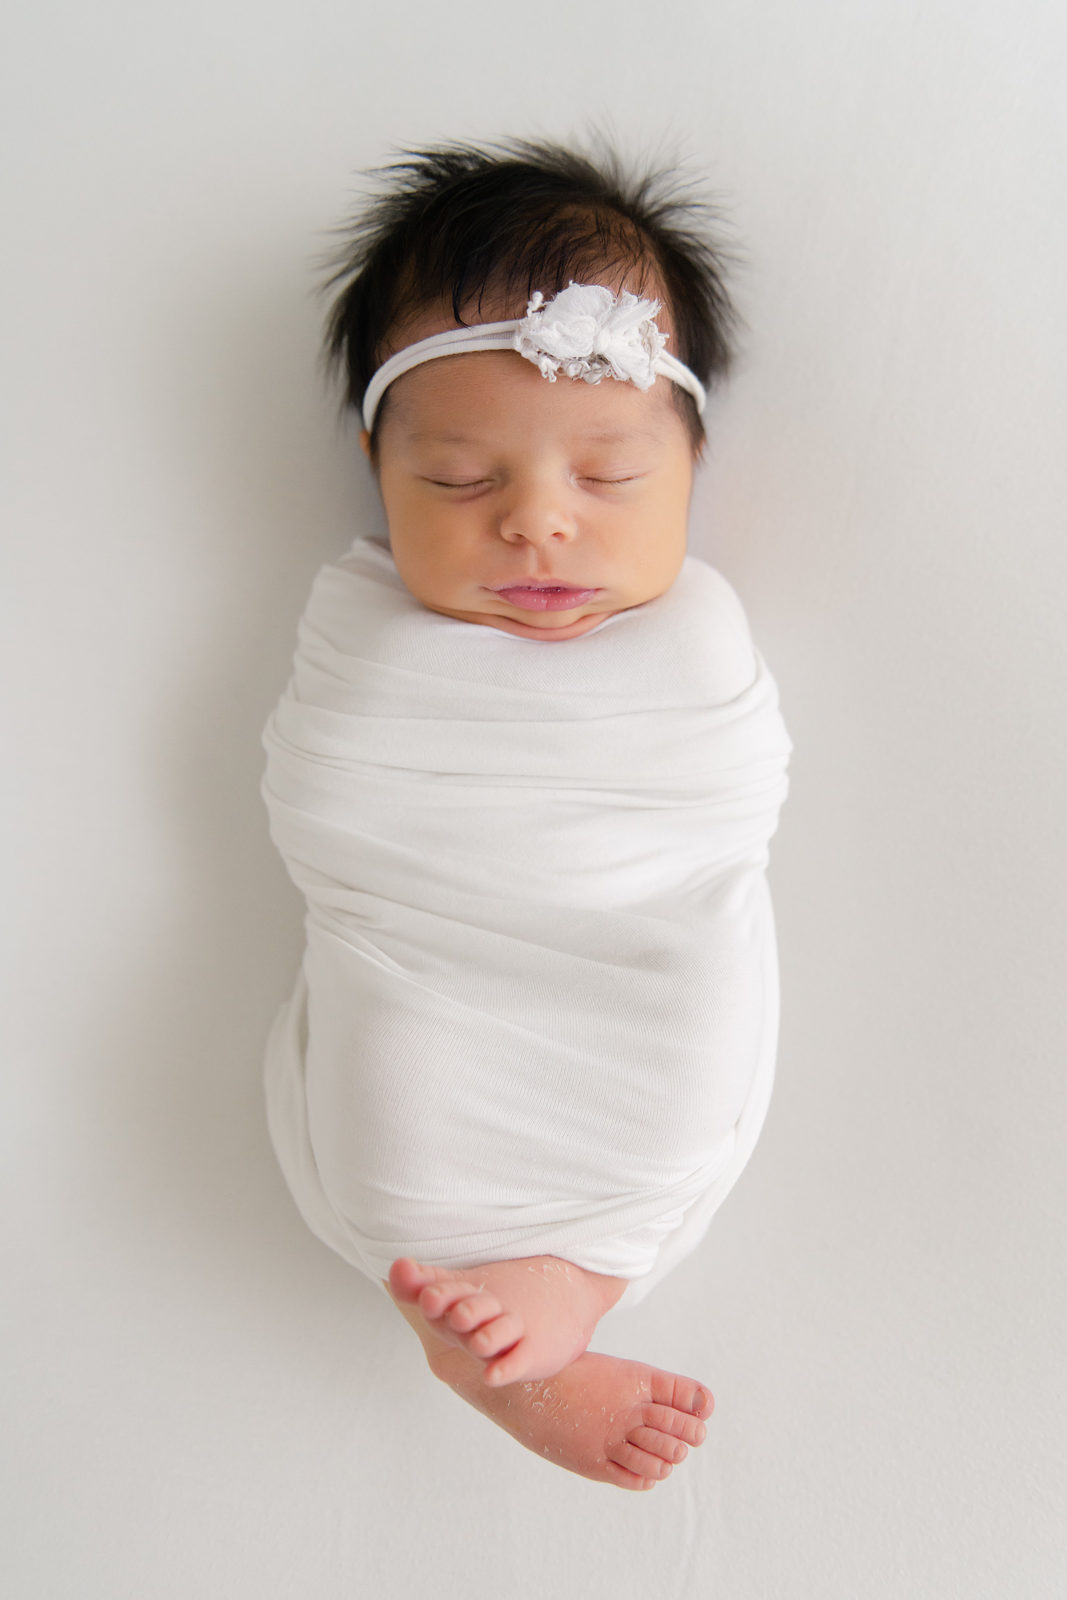 a baby wrapped in a white blanket